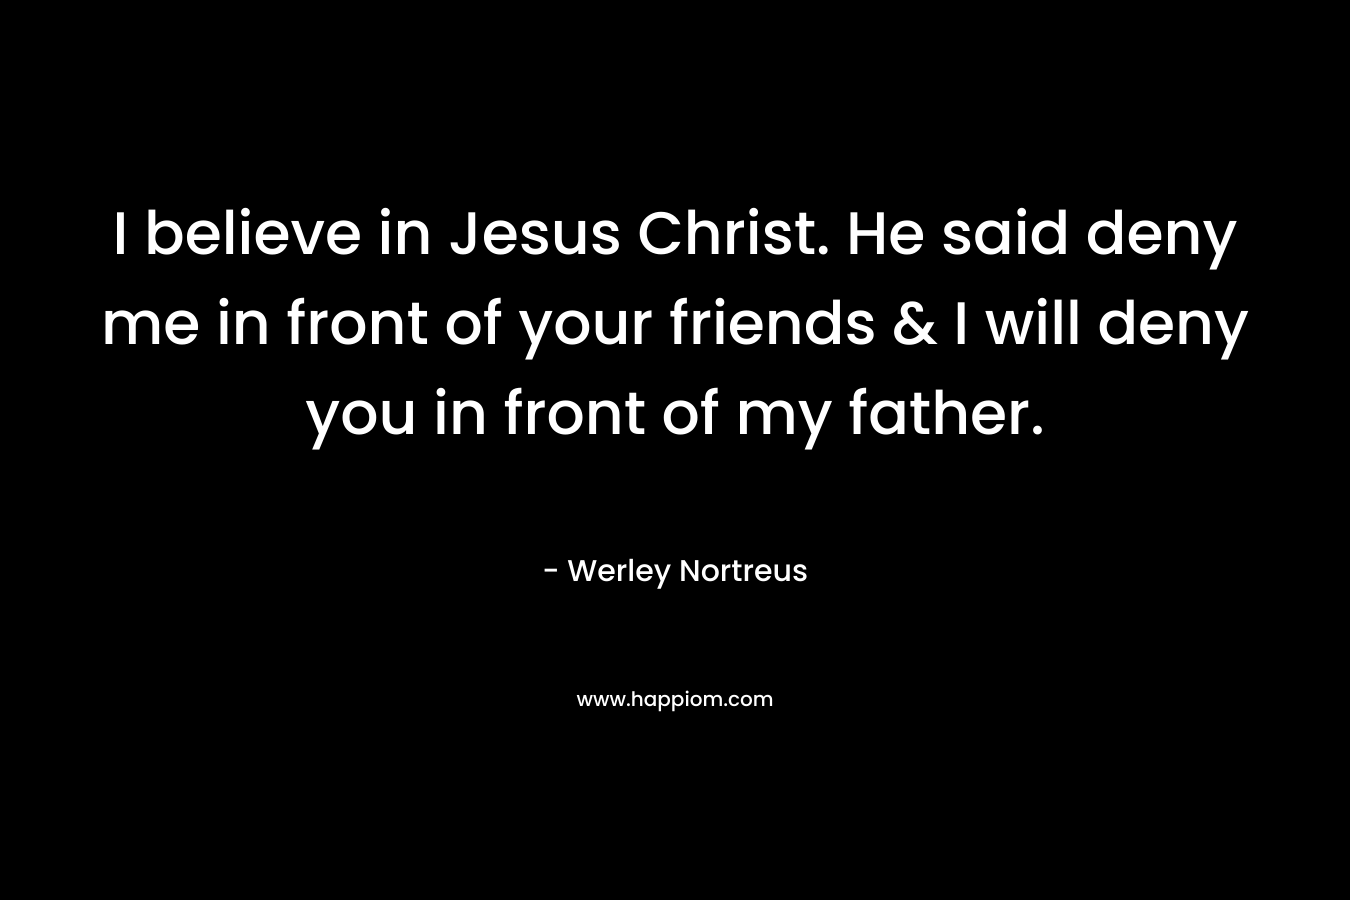 I believe in Jesus Christ. He said deny me in front of your friends & I will deny you in front of my father. – Werley Nortreus